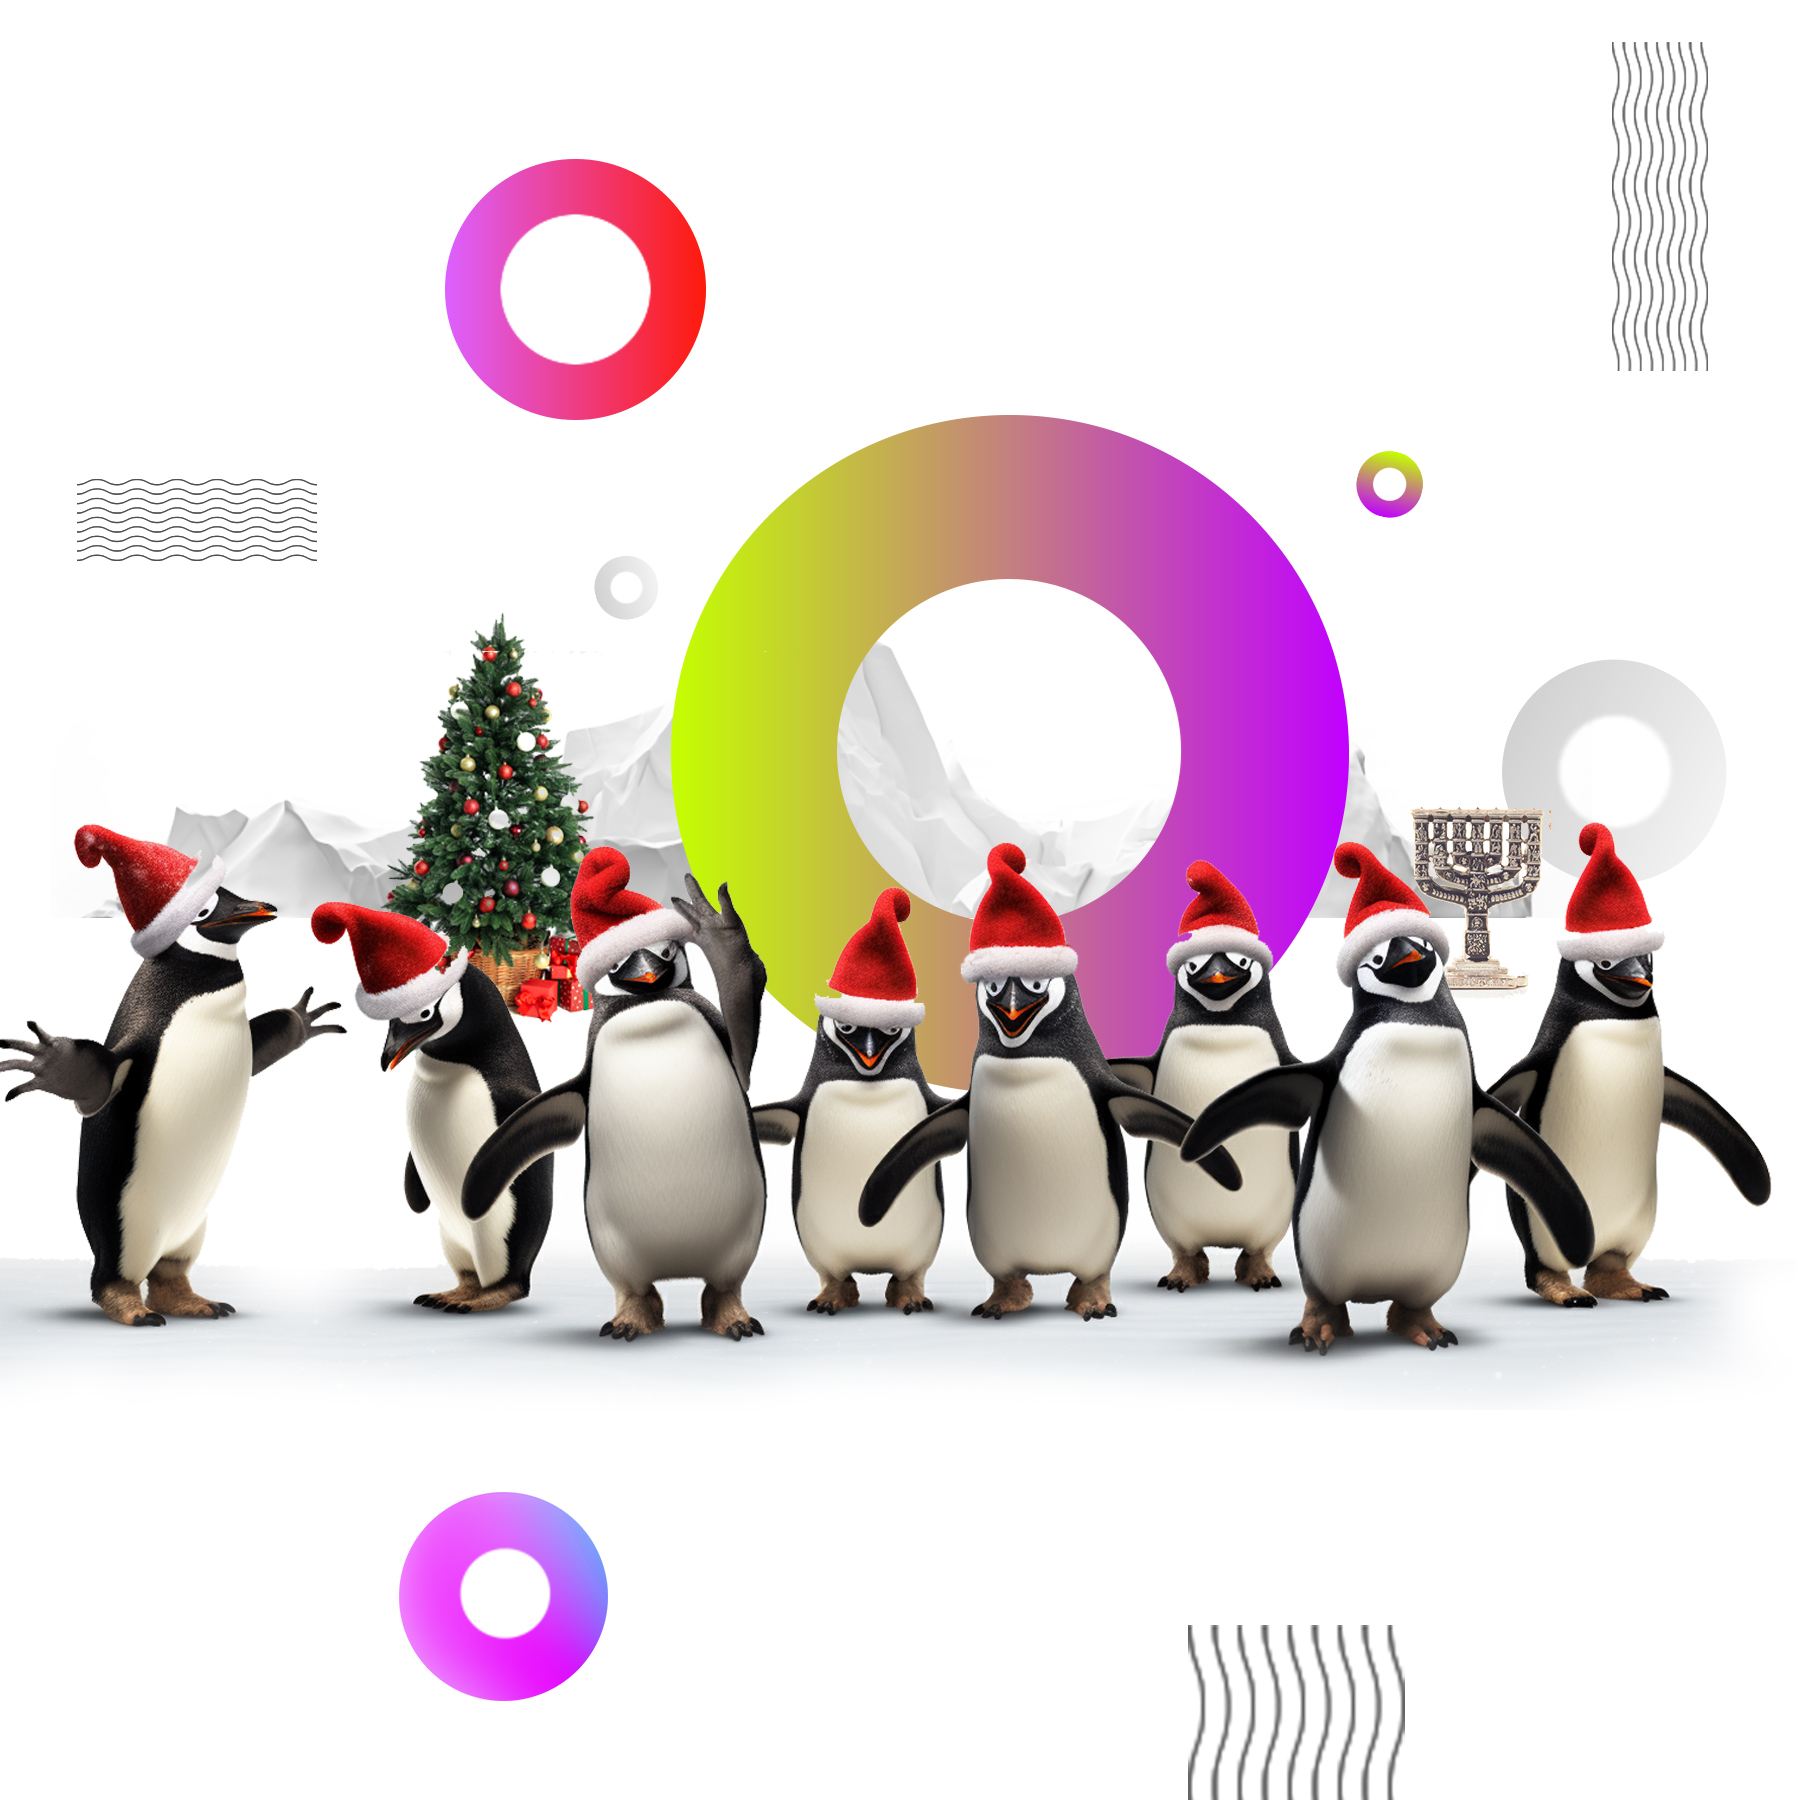 10 Key Lessons B2B CMOs Can Learn from Penguins!